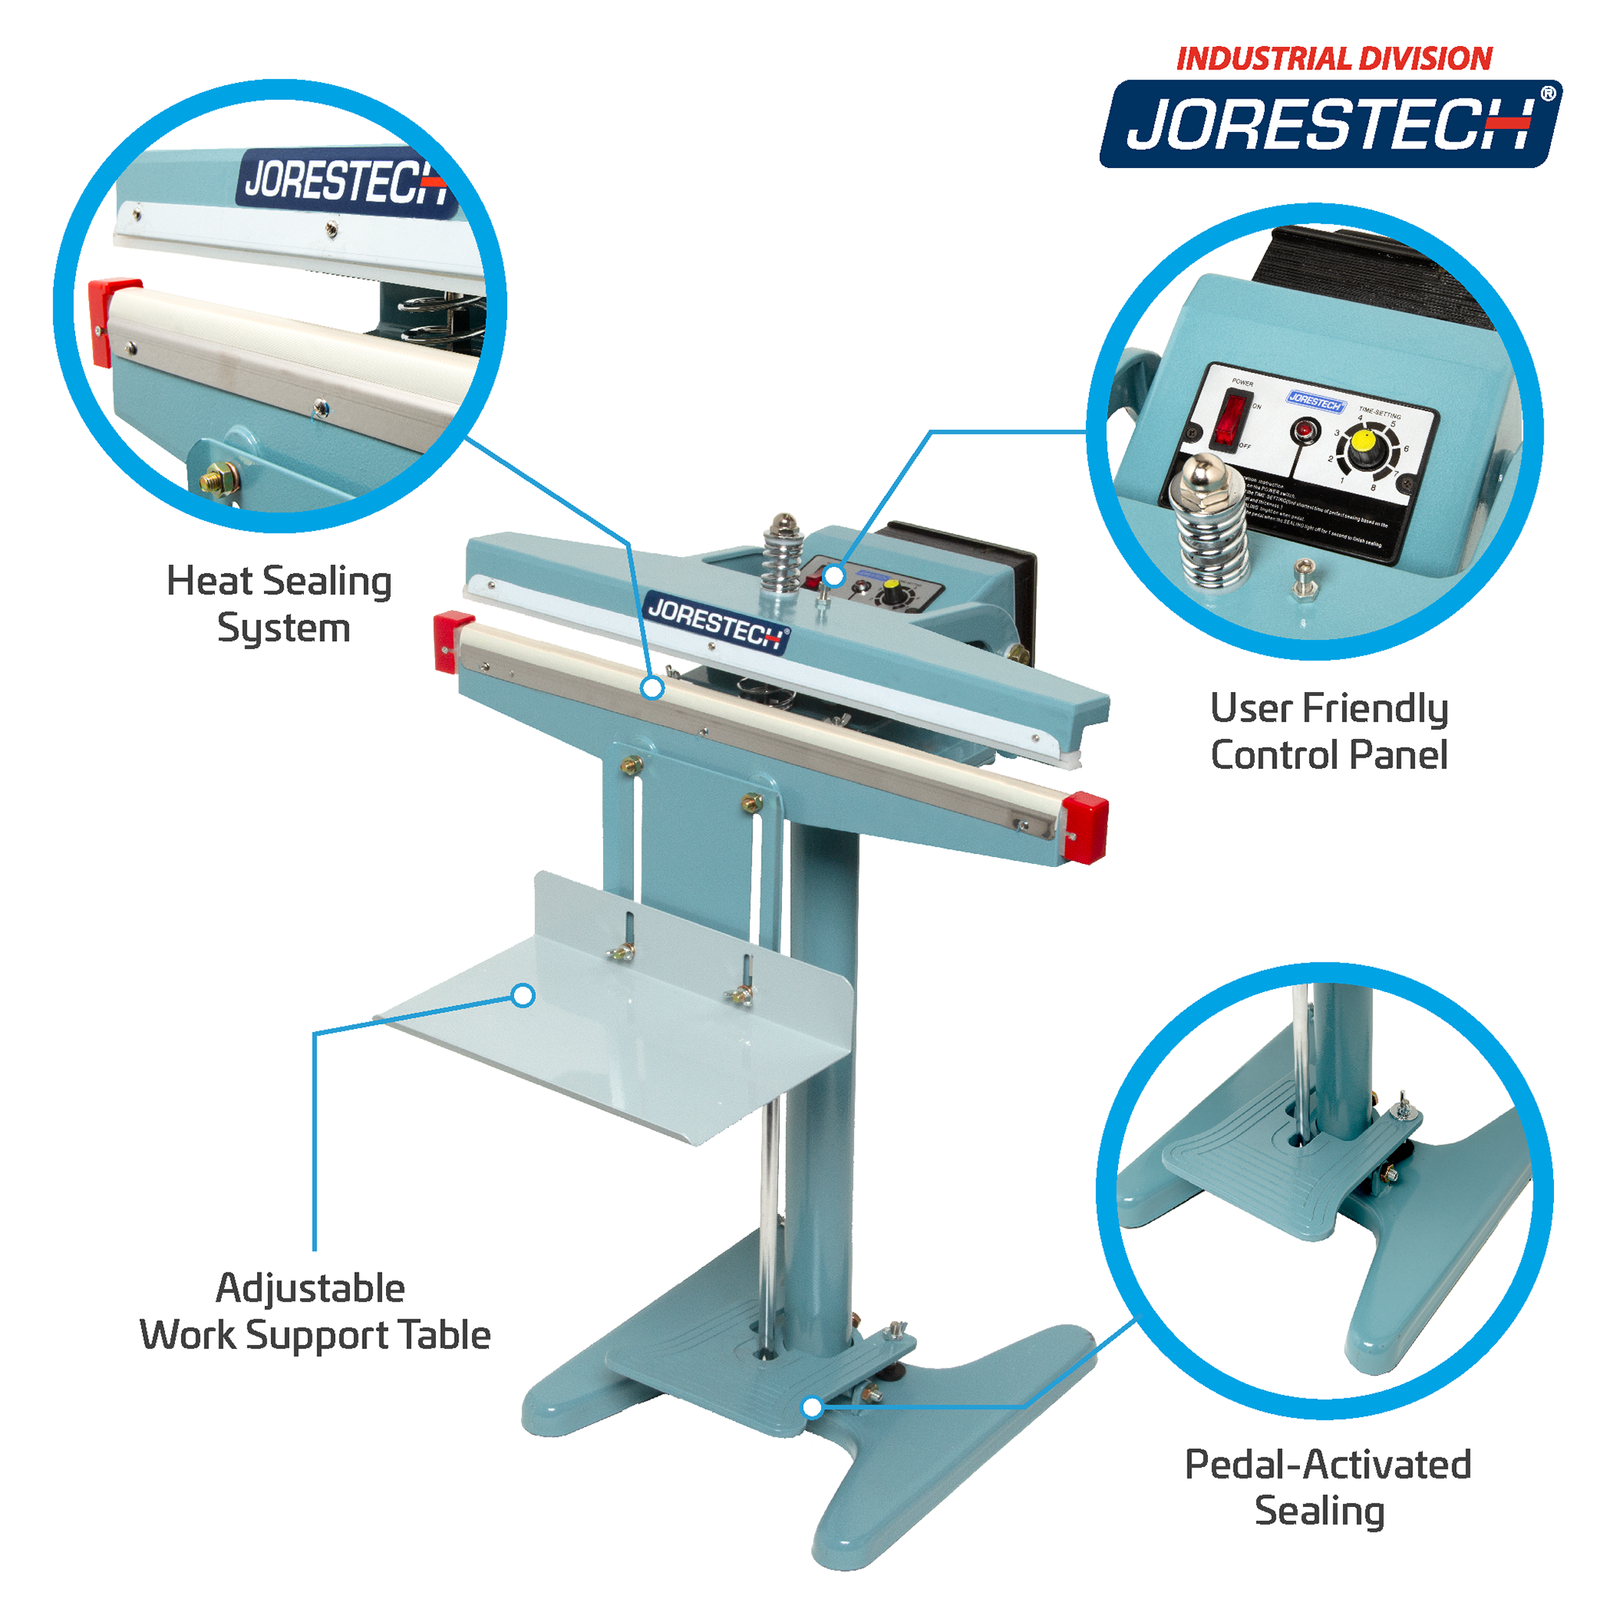 Infographic shows the JORES TECHNOLOGIES® foot impulse bag sealer. Features include Heat Sealing System, User Friendly Control Panel, Pedal-Activated Sealing, and Adjustable Work Support Table. Close-ups of sealing element, foot pedal, and control panel.